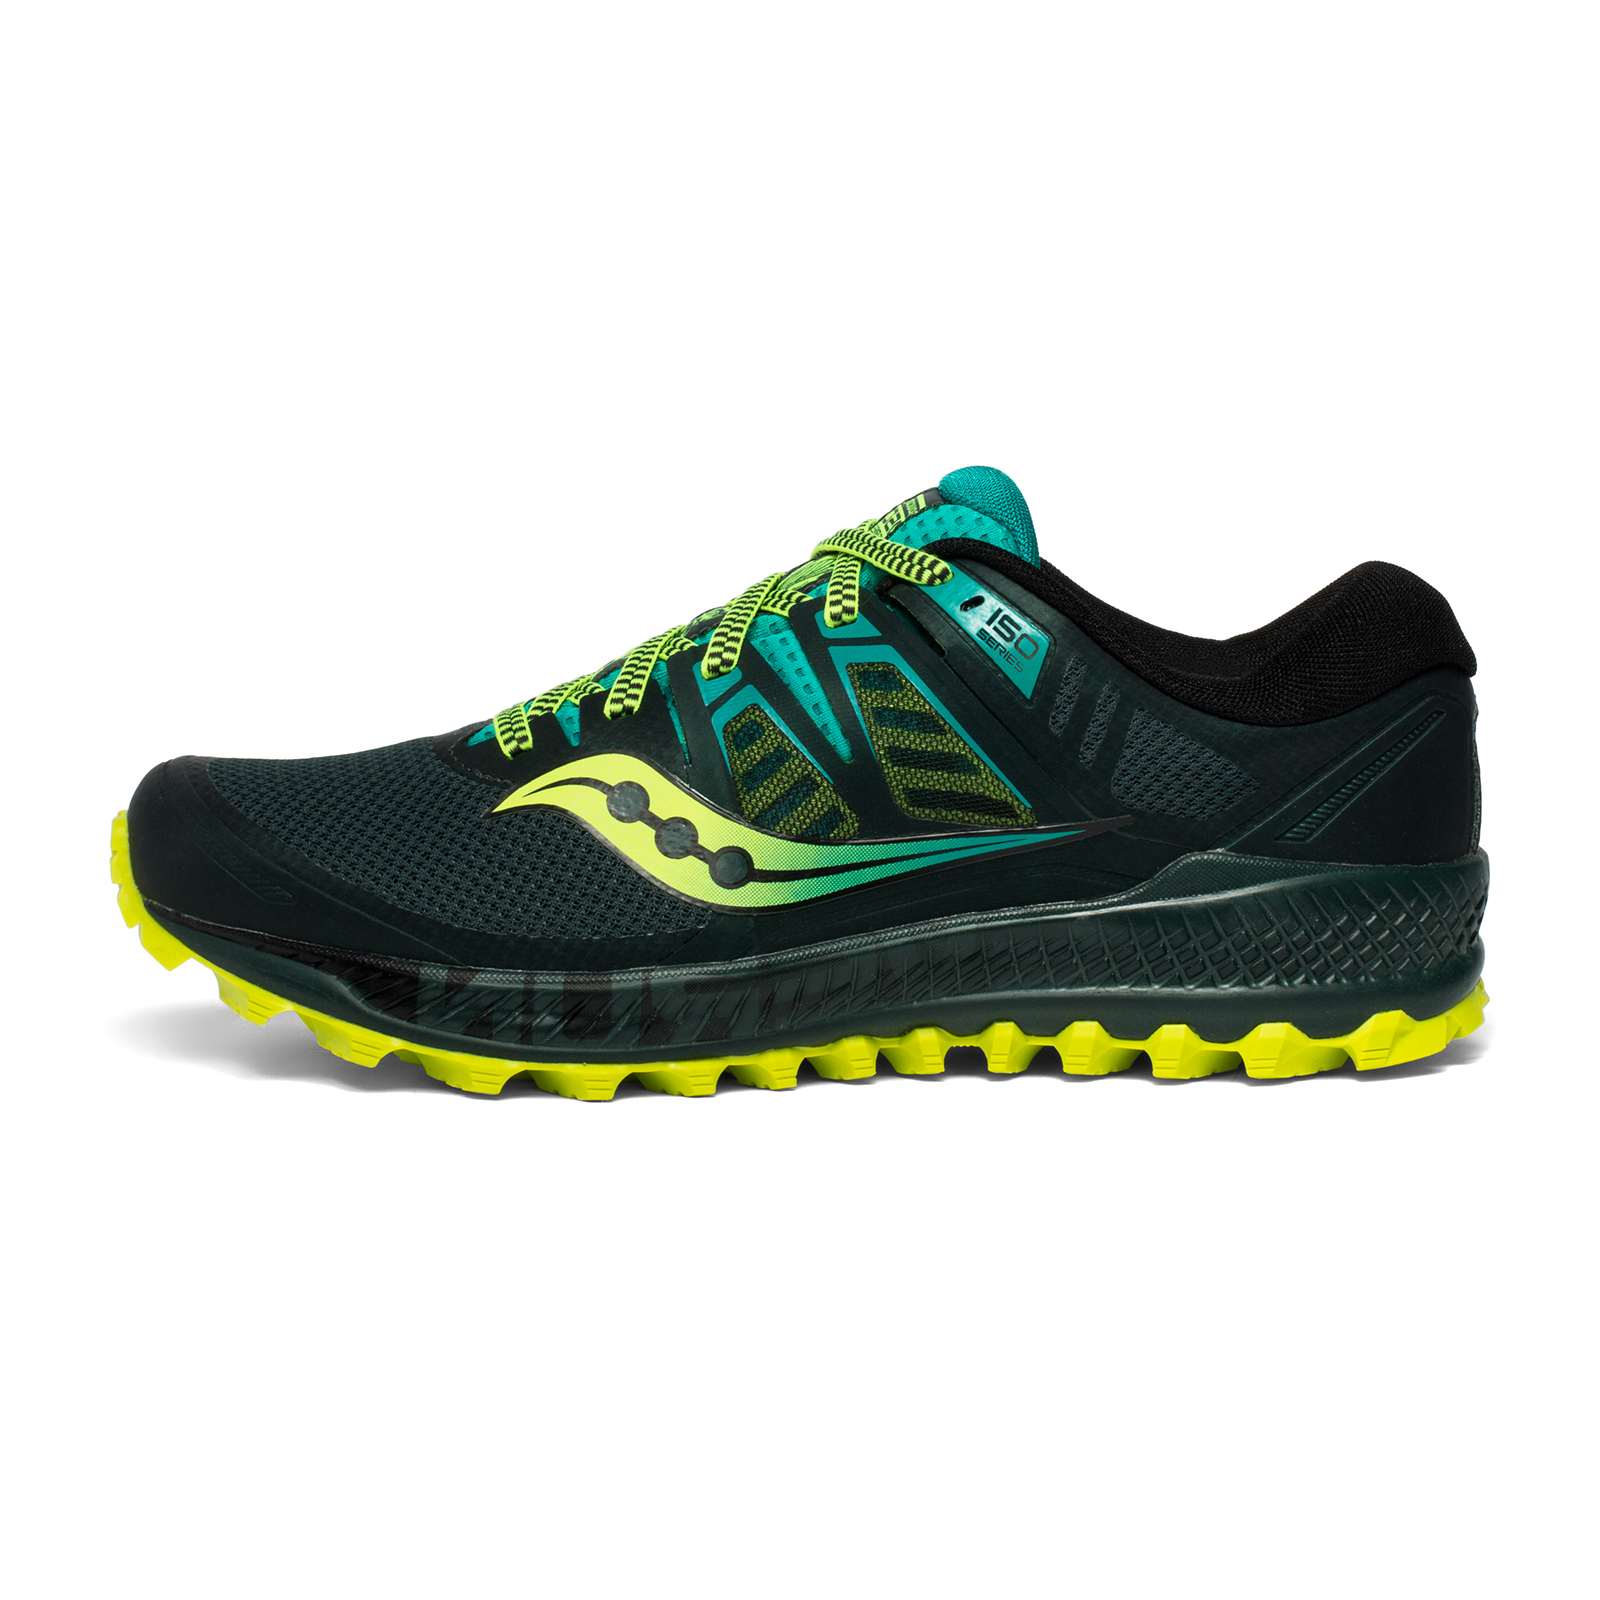 Chaussures Trail Peregrine Iso - Green/Teal